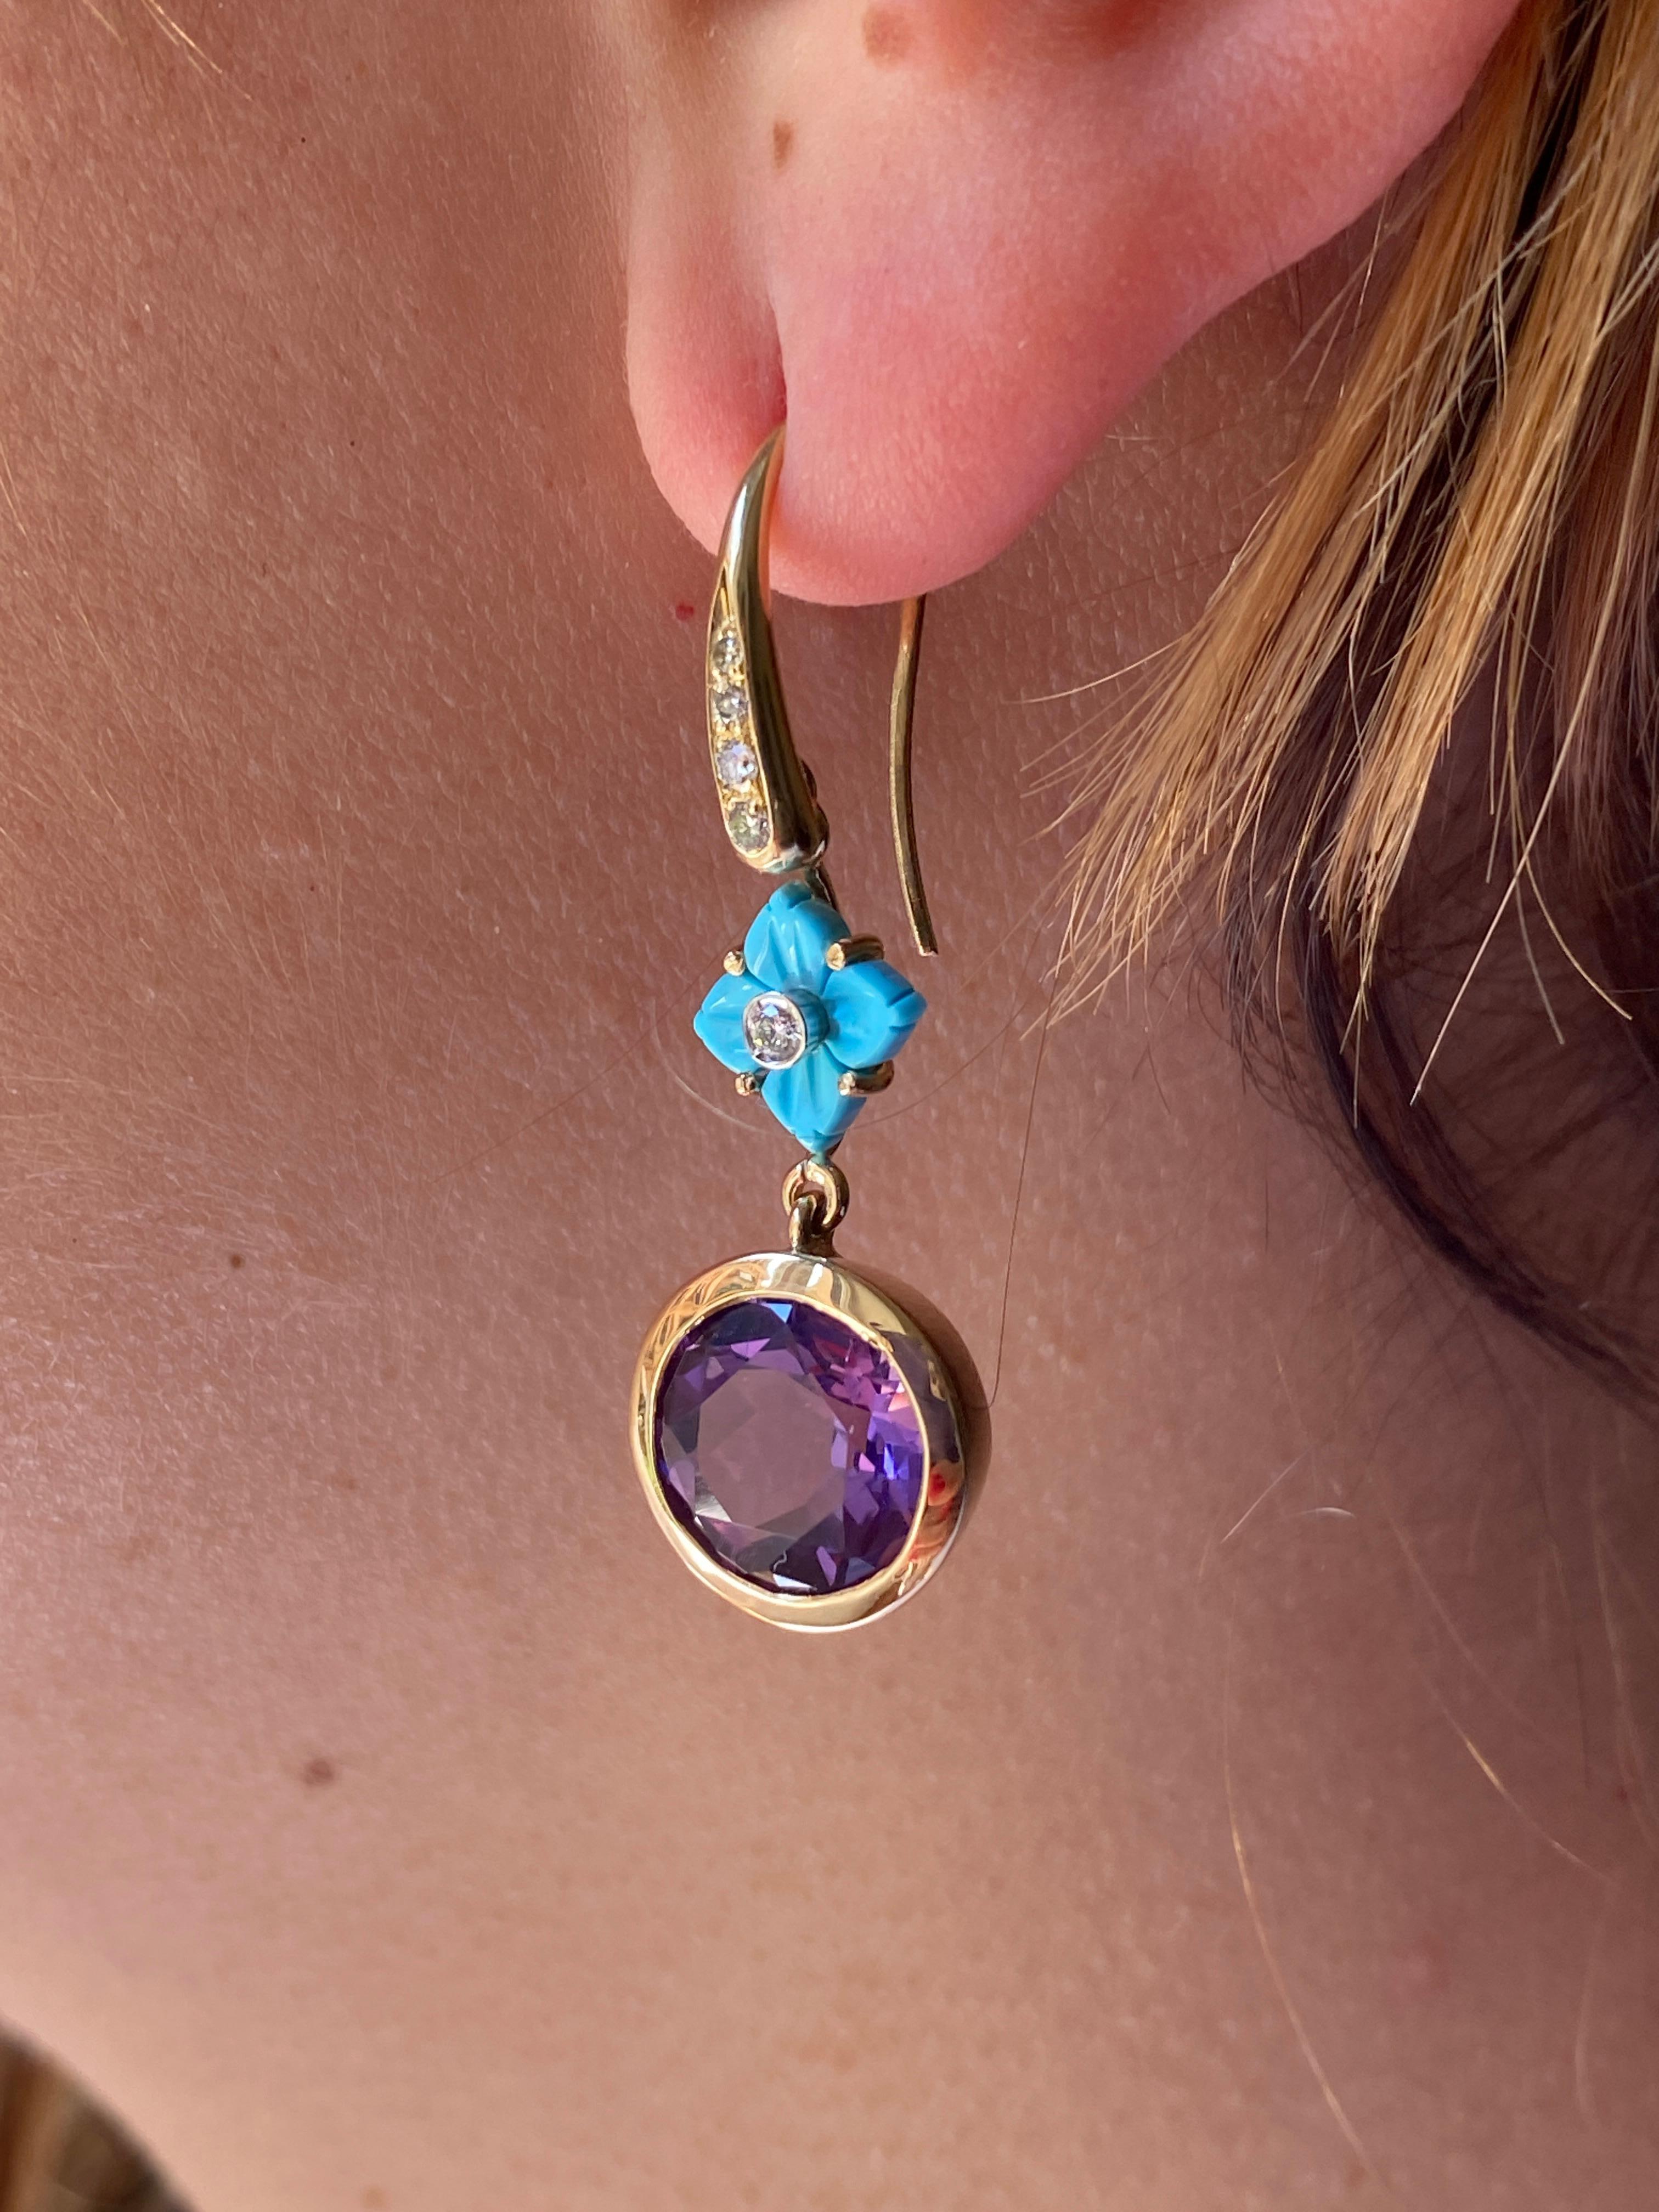 Unique 18k Gold Earrings Turquoise Flower Amethyst Diamonds Handcrafted in Italy For Sale 4